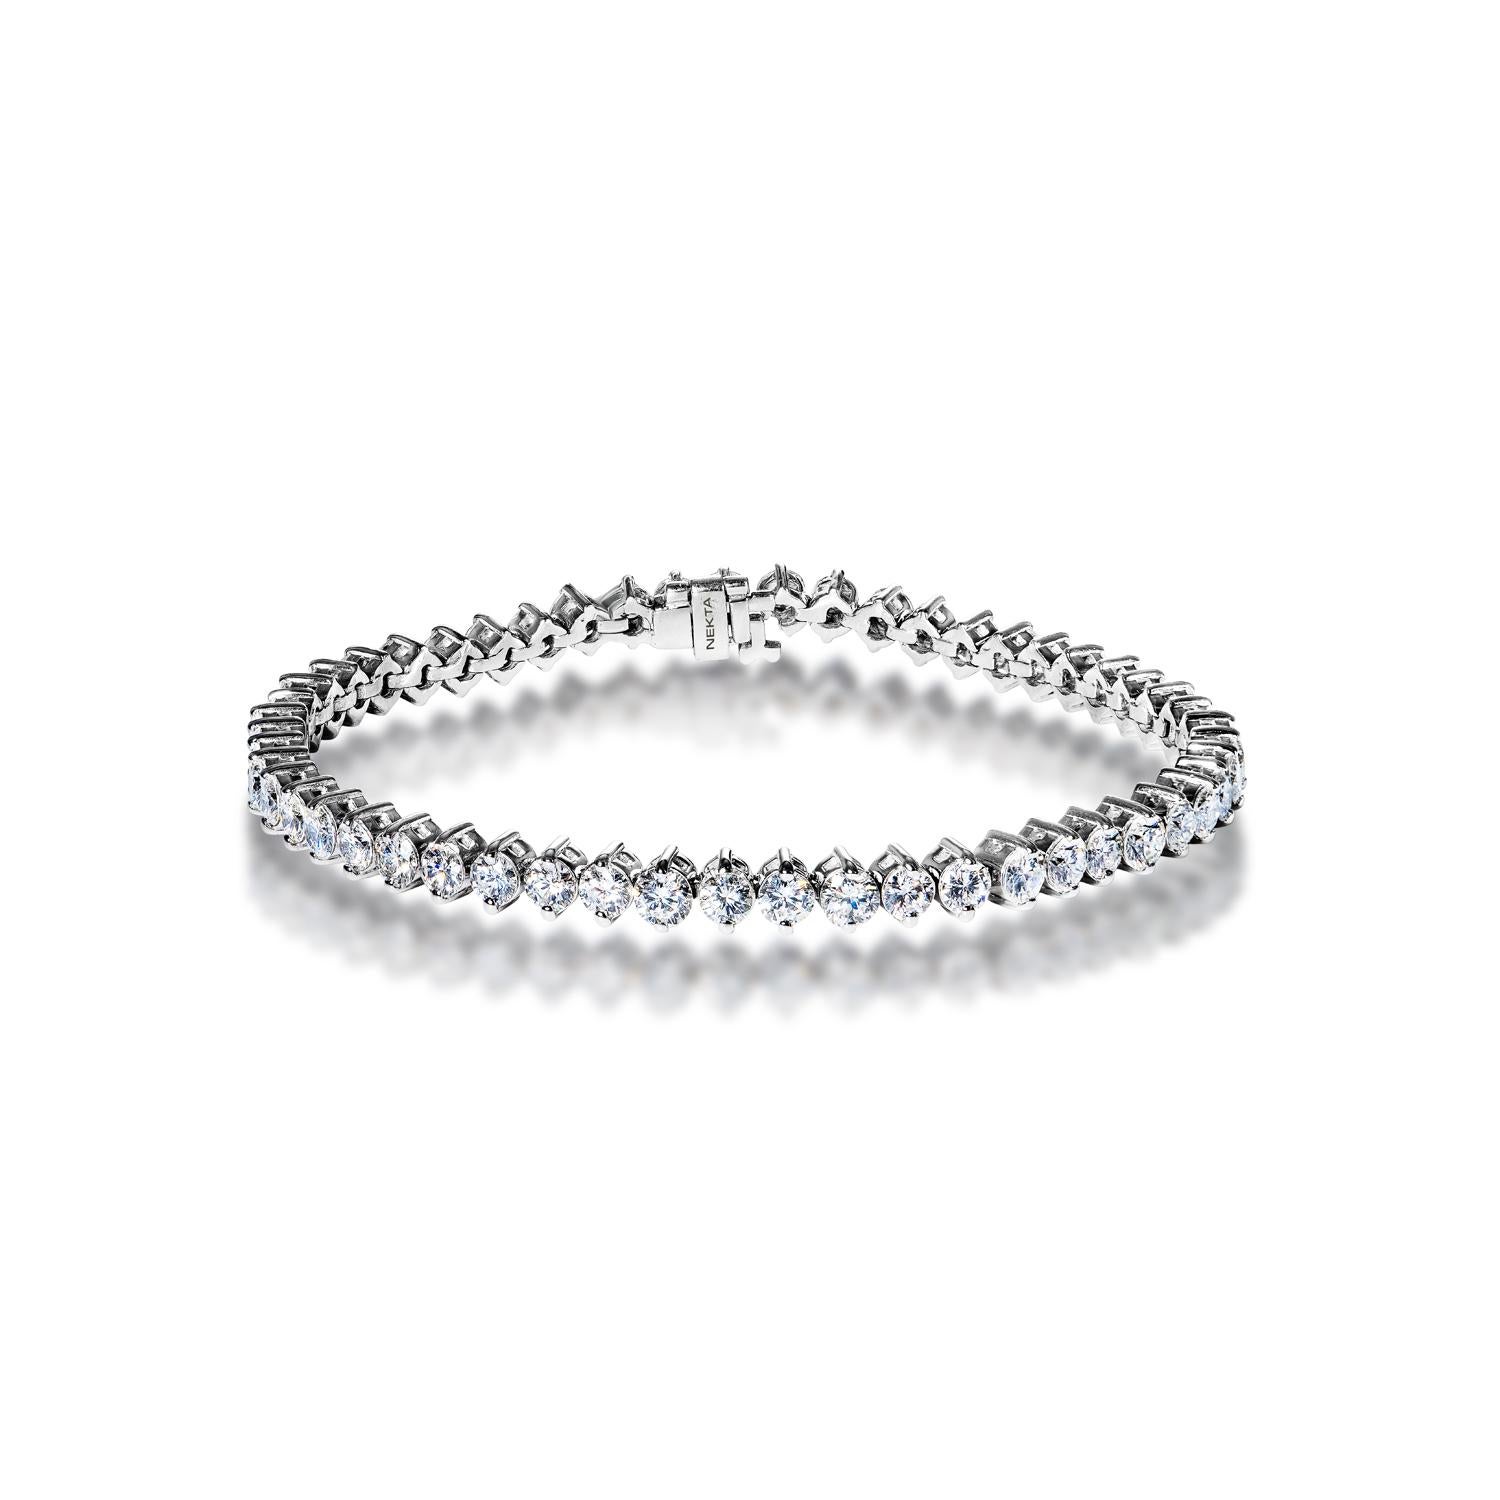 These diamonds are round and brilliant cut to perfection, making her sparkle like never before! Our 14k White Gold Single Row Diamond Bracelet gives you a timeless classic look with the utmost sophistication. Boasting a total of 53 diamonds and